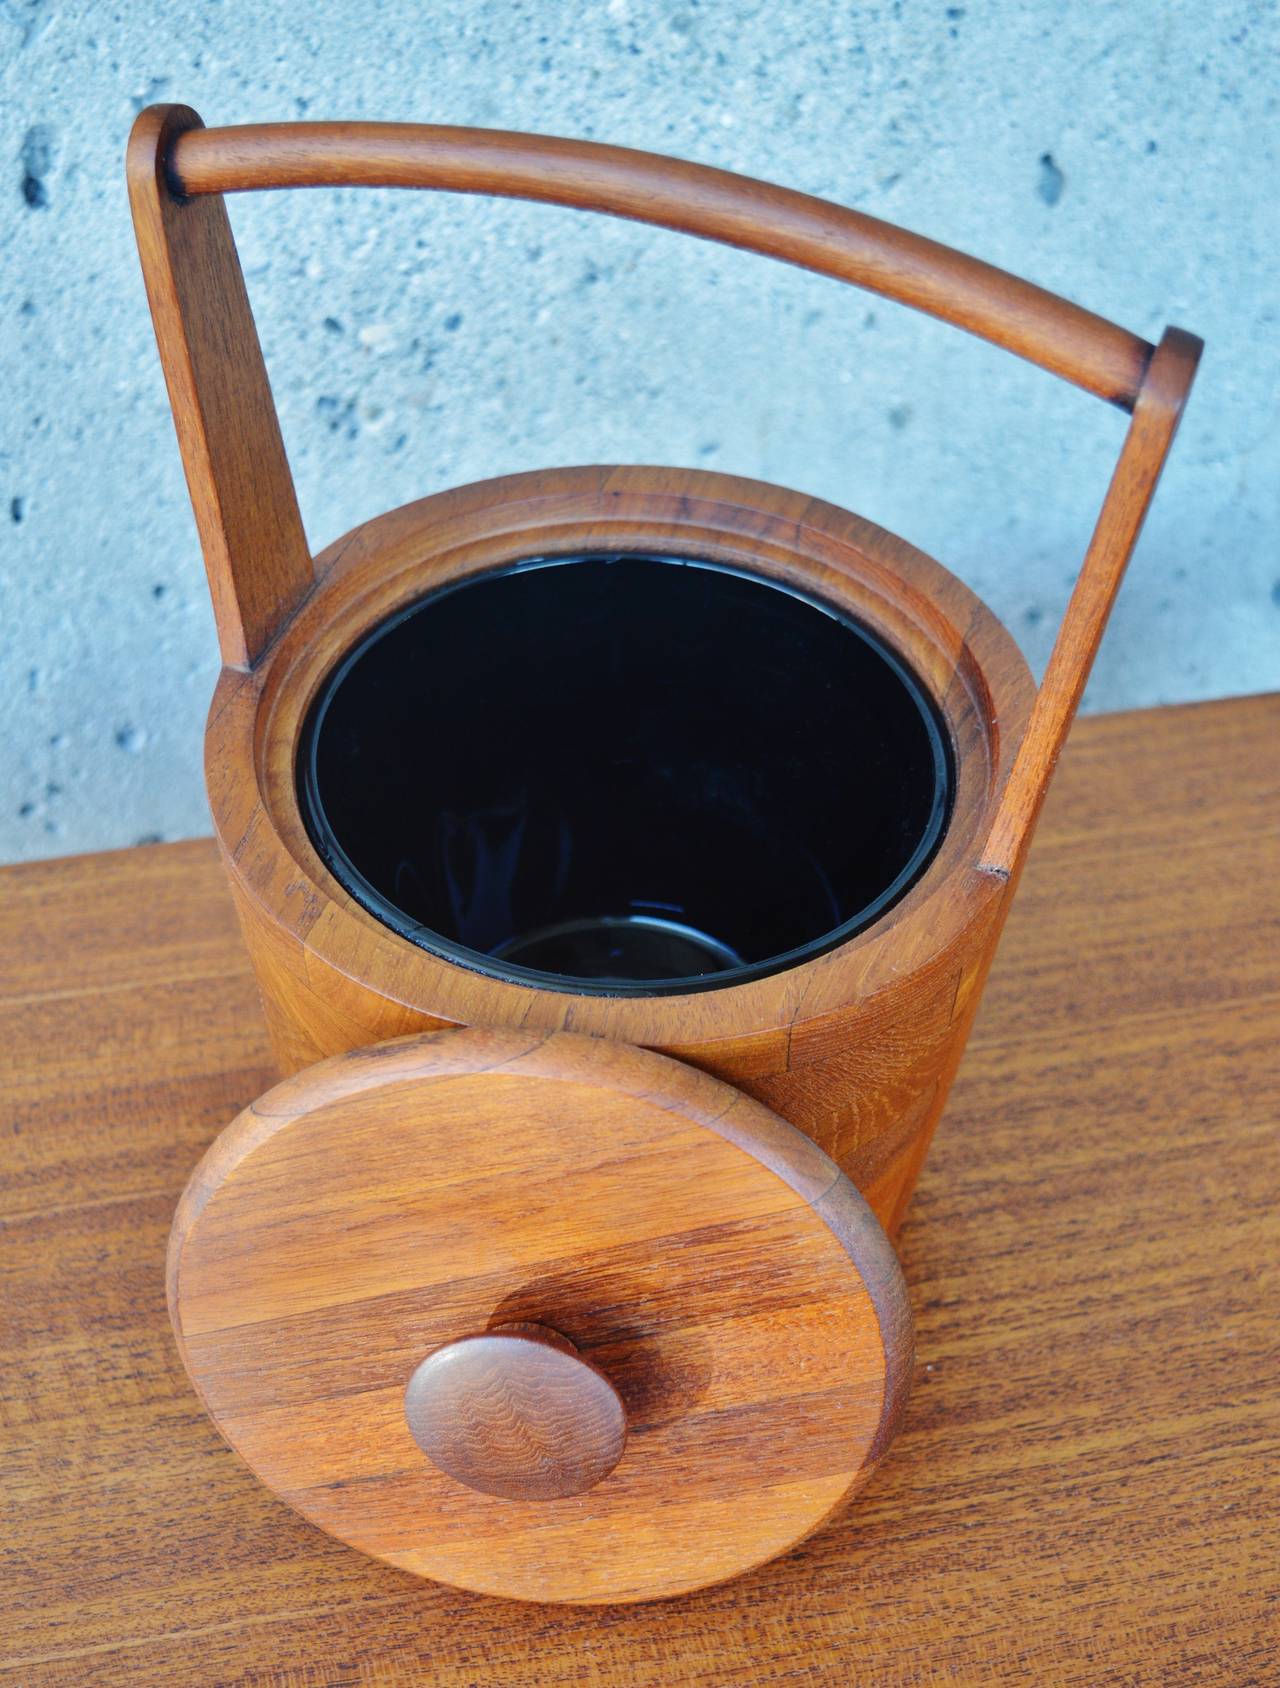 This rare model Danish Modern teak ice bucket by Jens Quistgaard is charming and beautifully crafted. Made of solid teak wood in a mosaic pattern with the handle merging into the bucket with a lovely flare. The insert is made of black glass. In